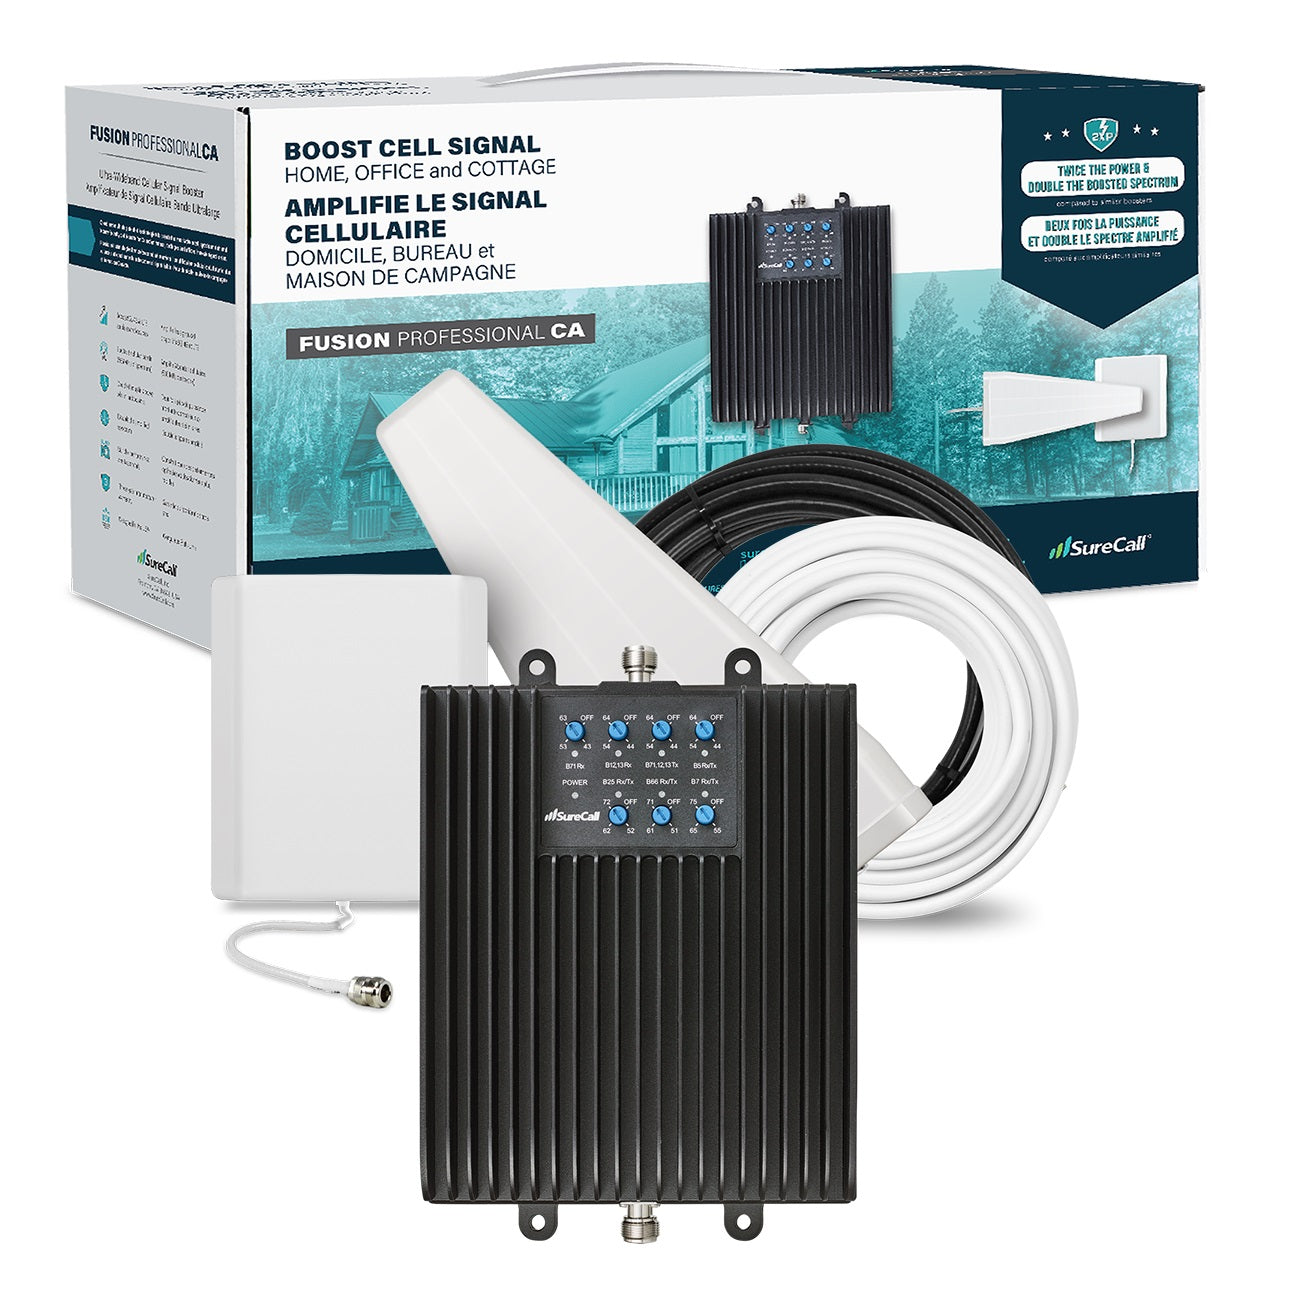 SureCall Fusion Professional 2.0 Cell Signal Booster Kit for Home/Office | Up to 17,000 sq ft | All Canadian Carriers 4G/5G - Bell, Rogers, Telus | ISED Approved